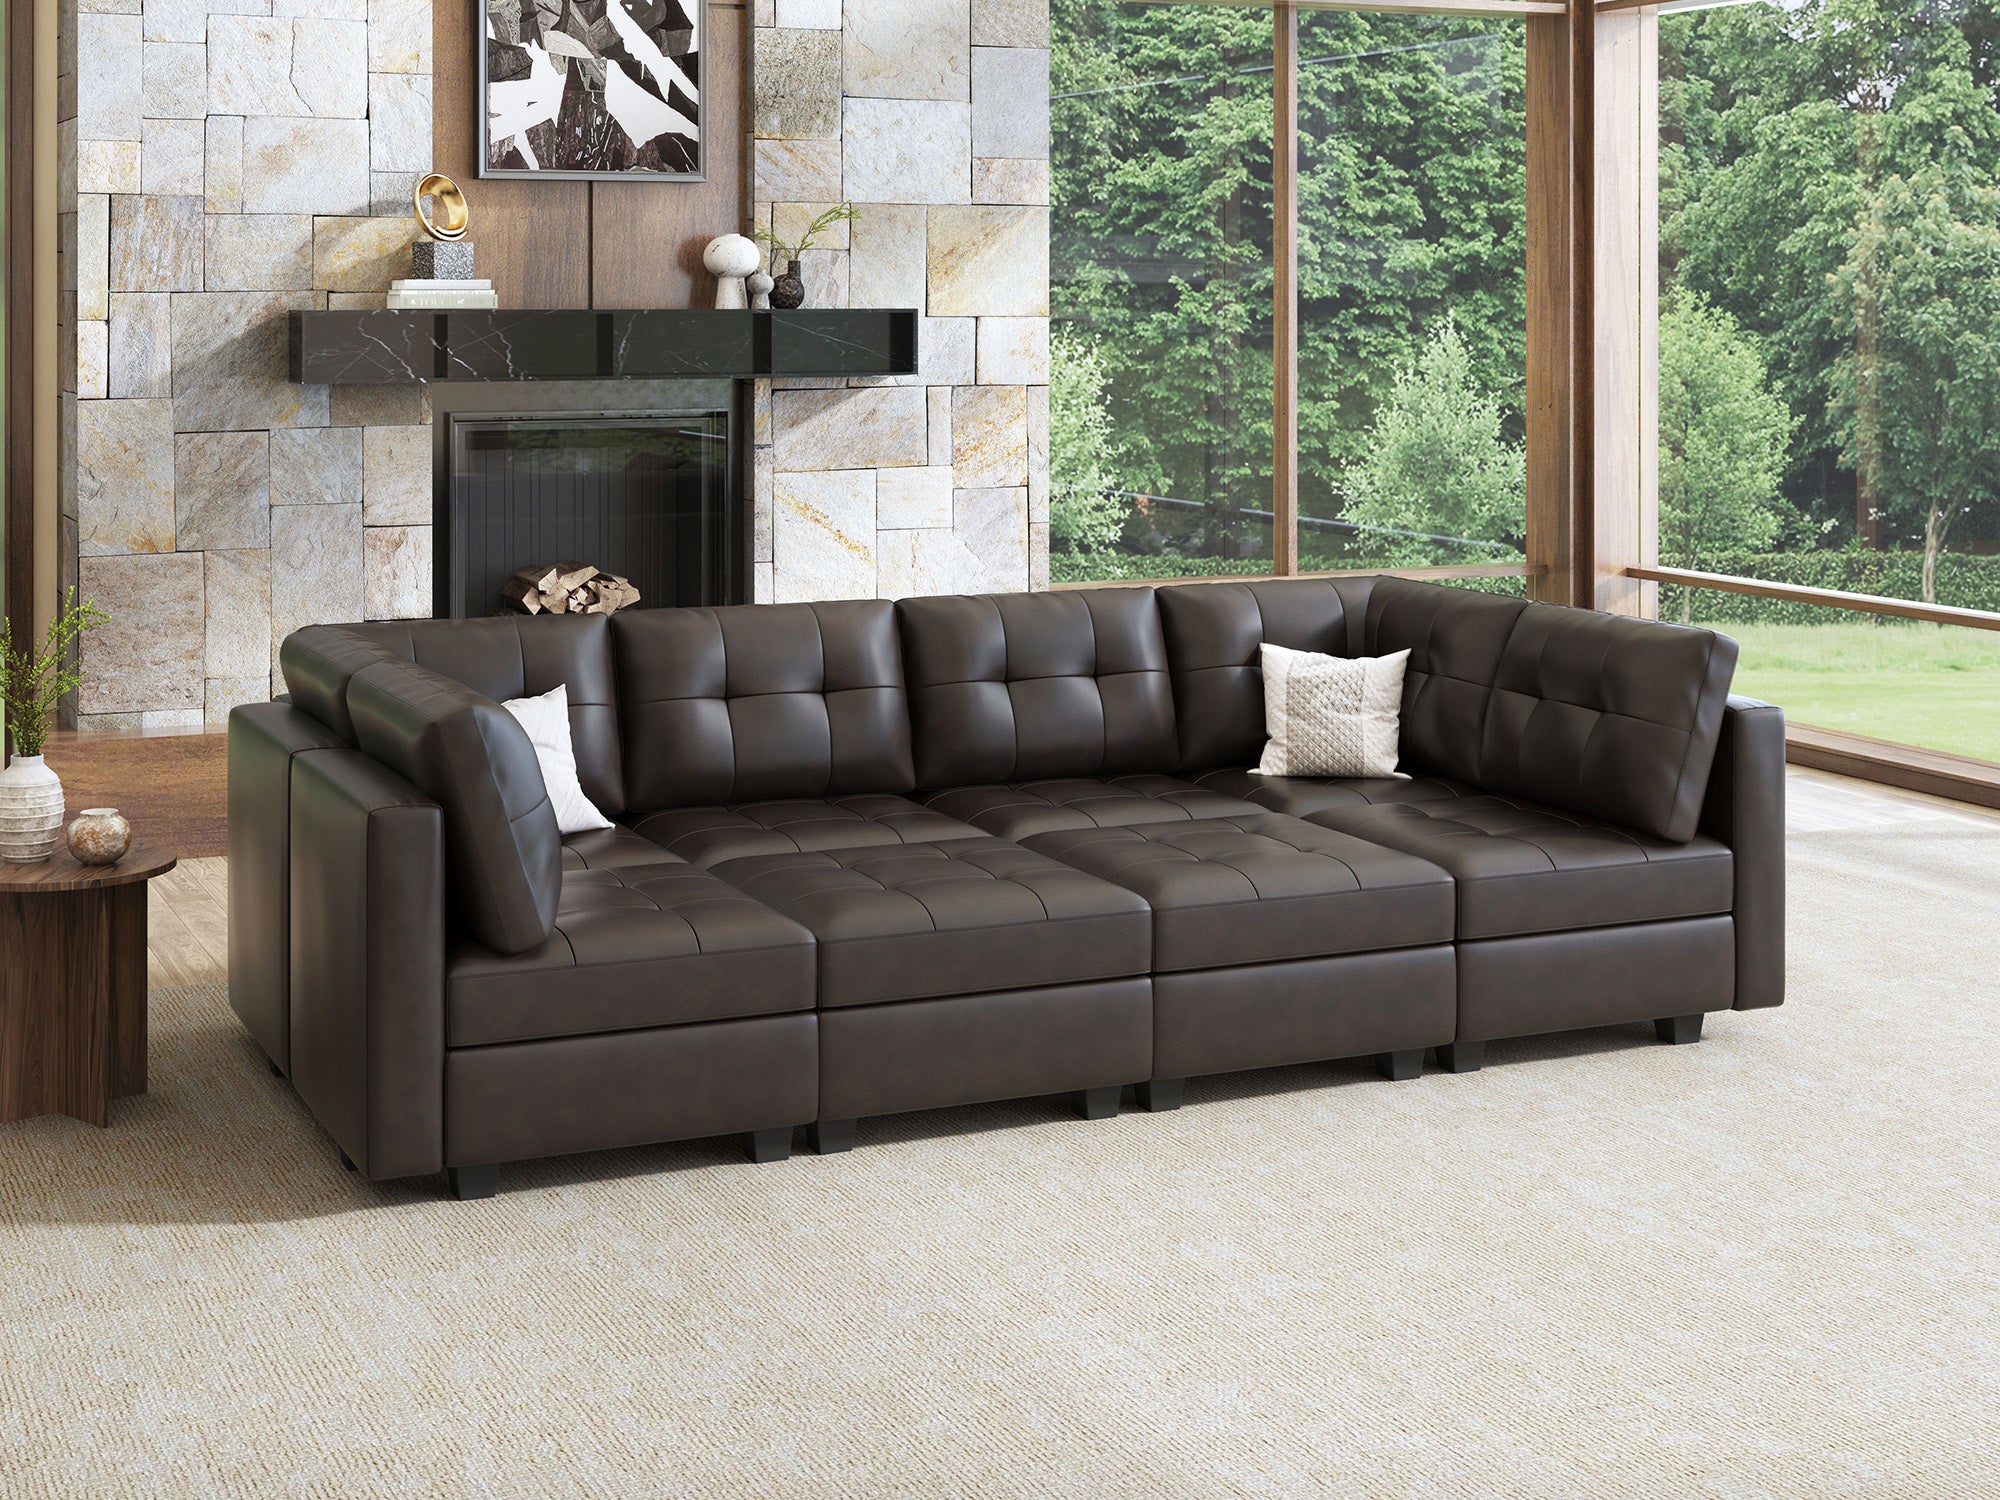 HONBAY 8-Piece Faux Leather Modular Sleeper Sectional With Storage Seat